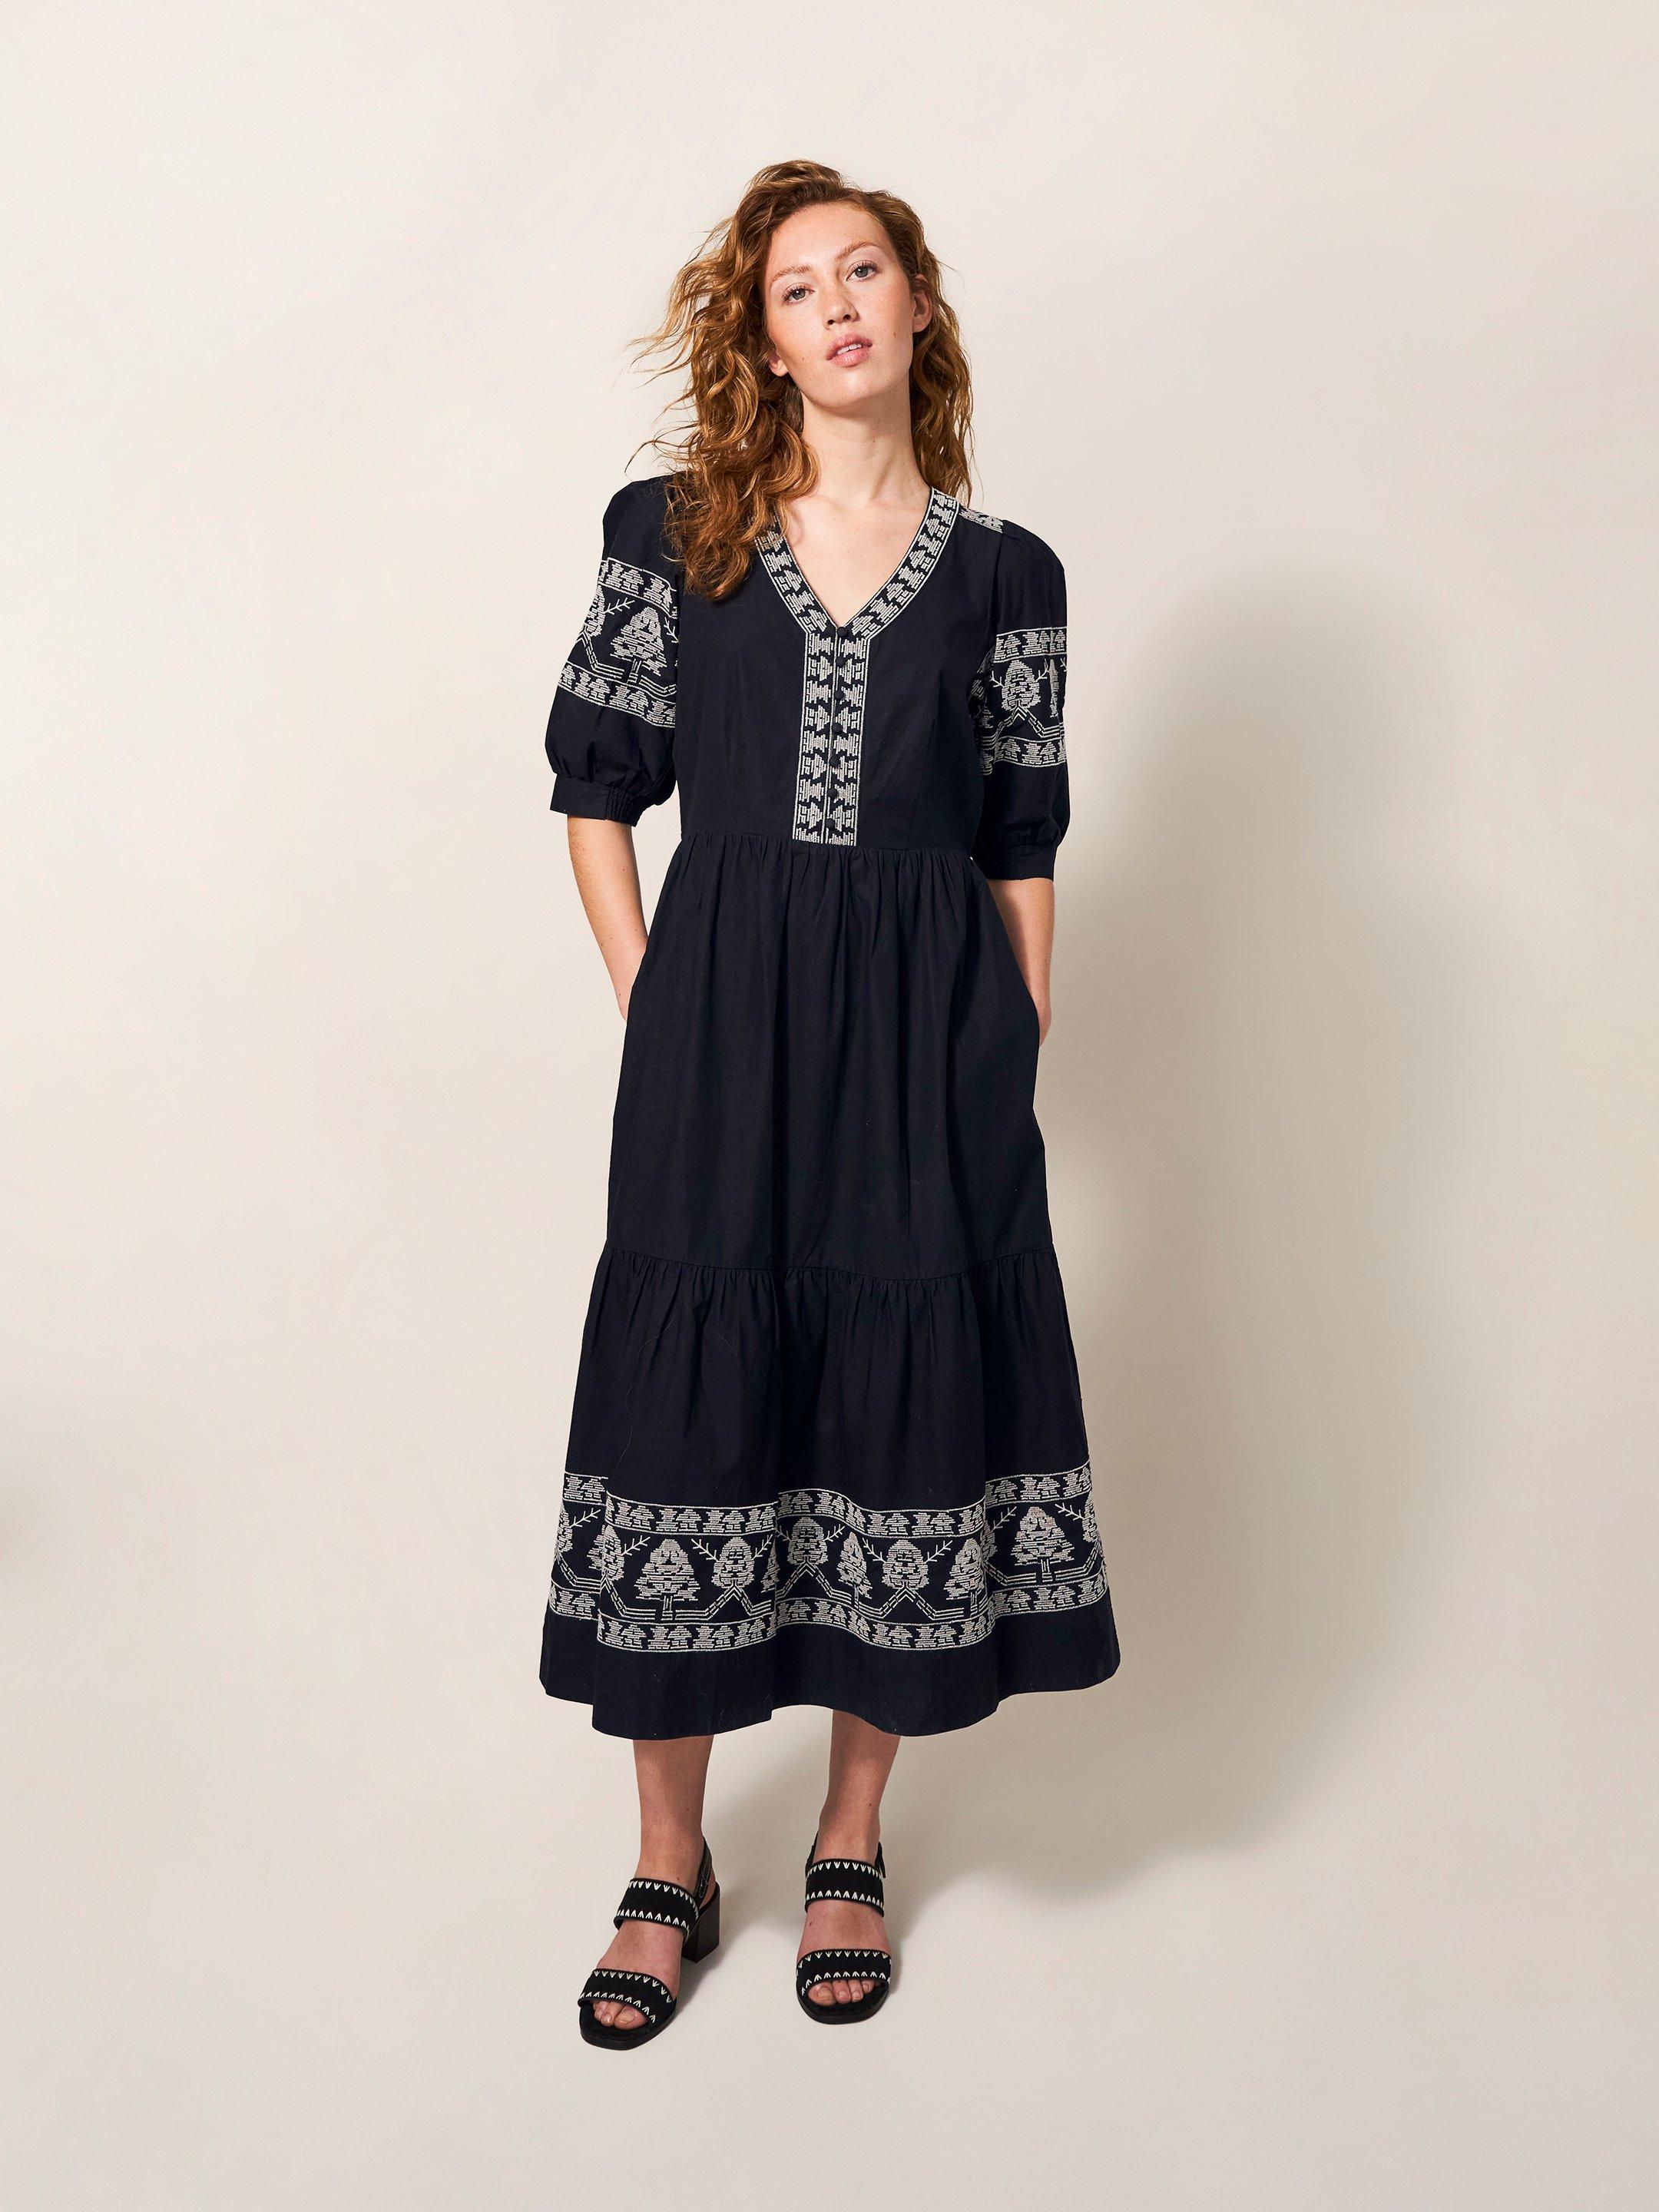 Dulcie Embroidered Midi Dress in BLK MLT - MODEL FRONT